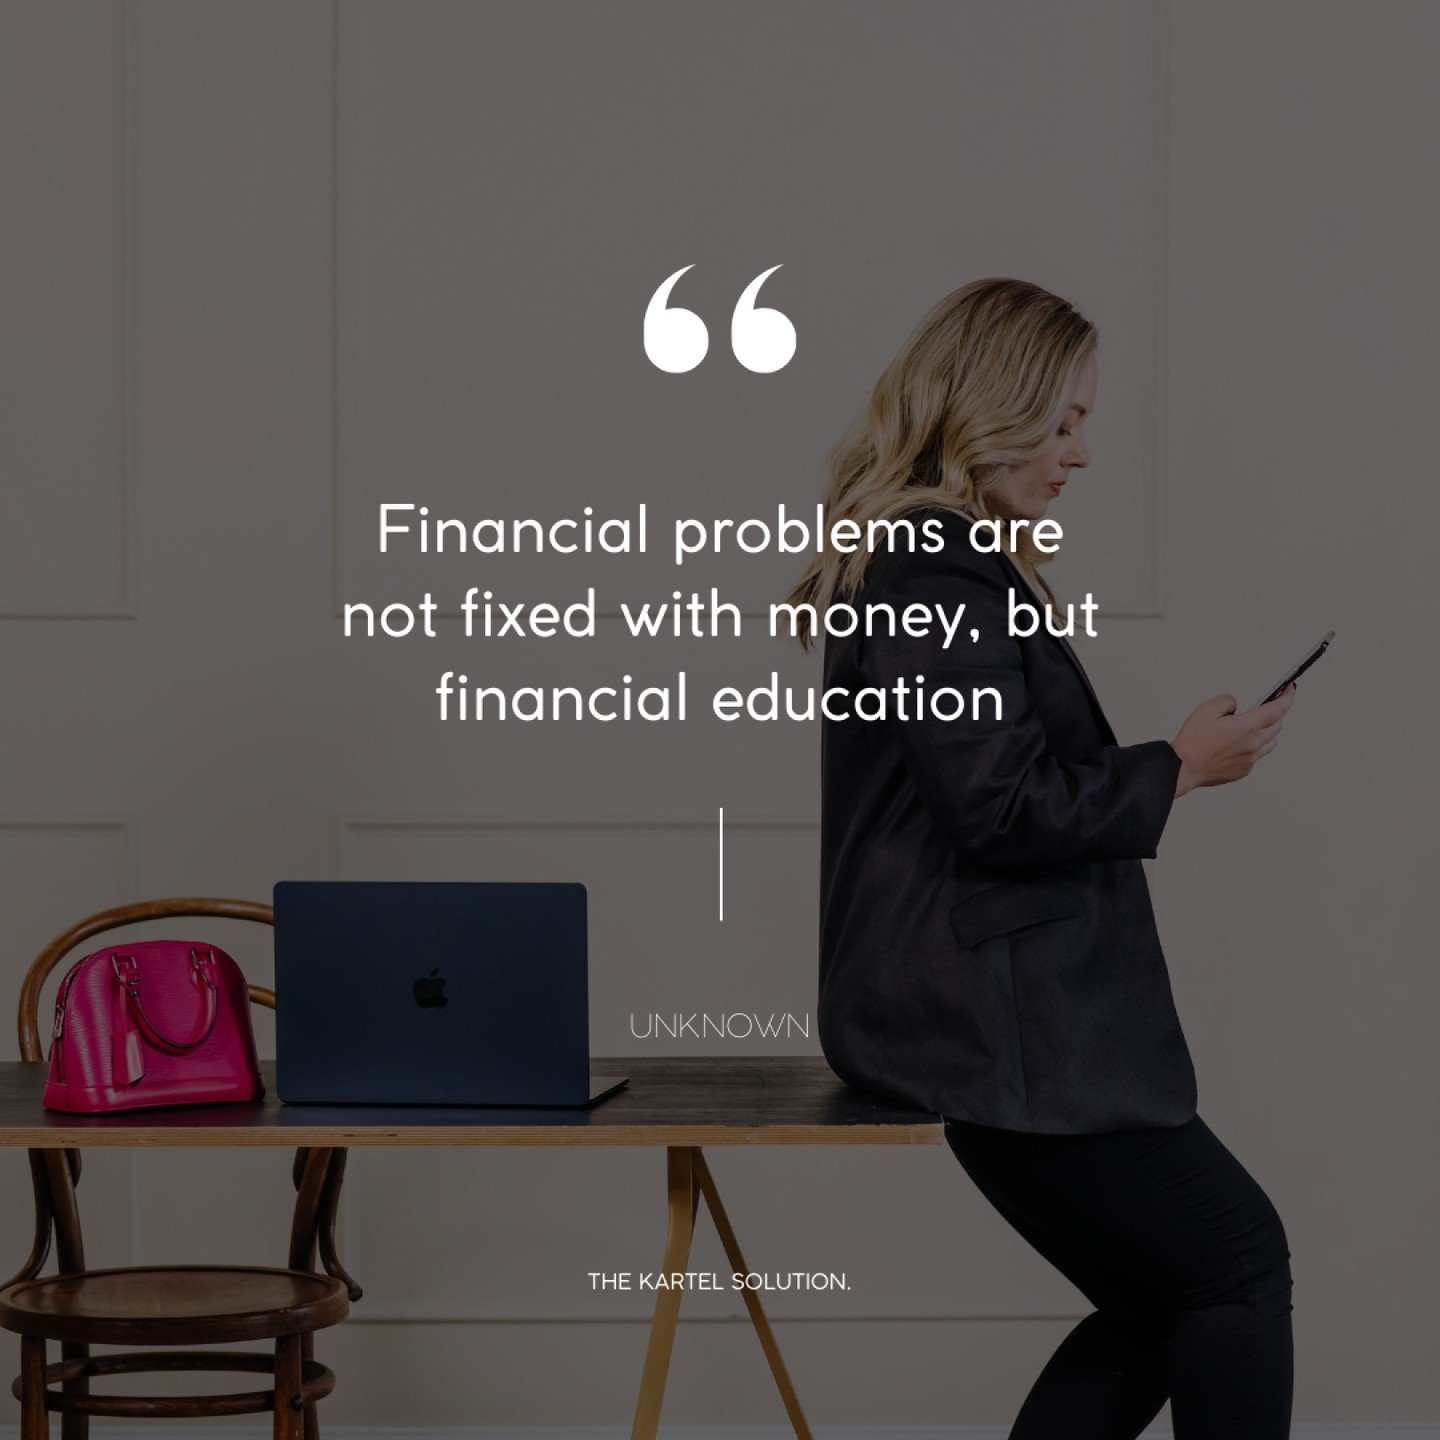 Let's talk about the real currency of financial freedom: knowledge. 

While it's tempting to believe that more money solves all problems, true financial empowerment often comes from understanding. Education is the key that unlocks the doors to smart 